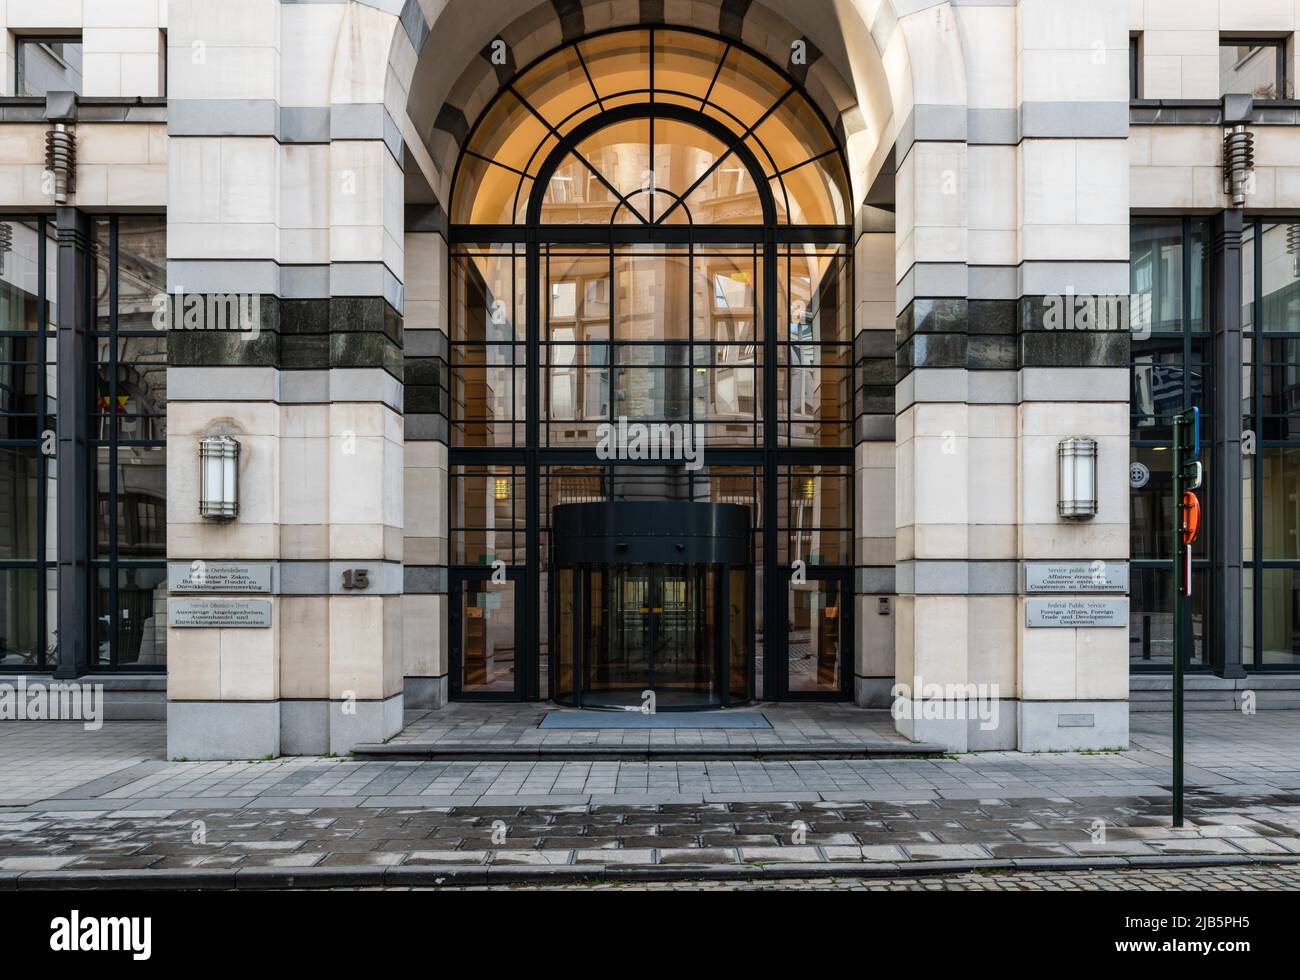 Brussels Old Town, Brussels Capital Region - Belgium - 12 20 2019 Facade and entrance of the Federal Public Service for Foreign Affairs. Stock Photo